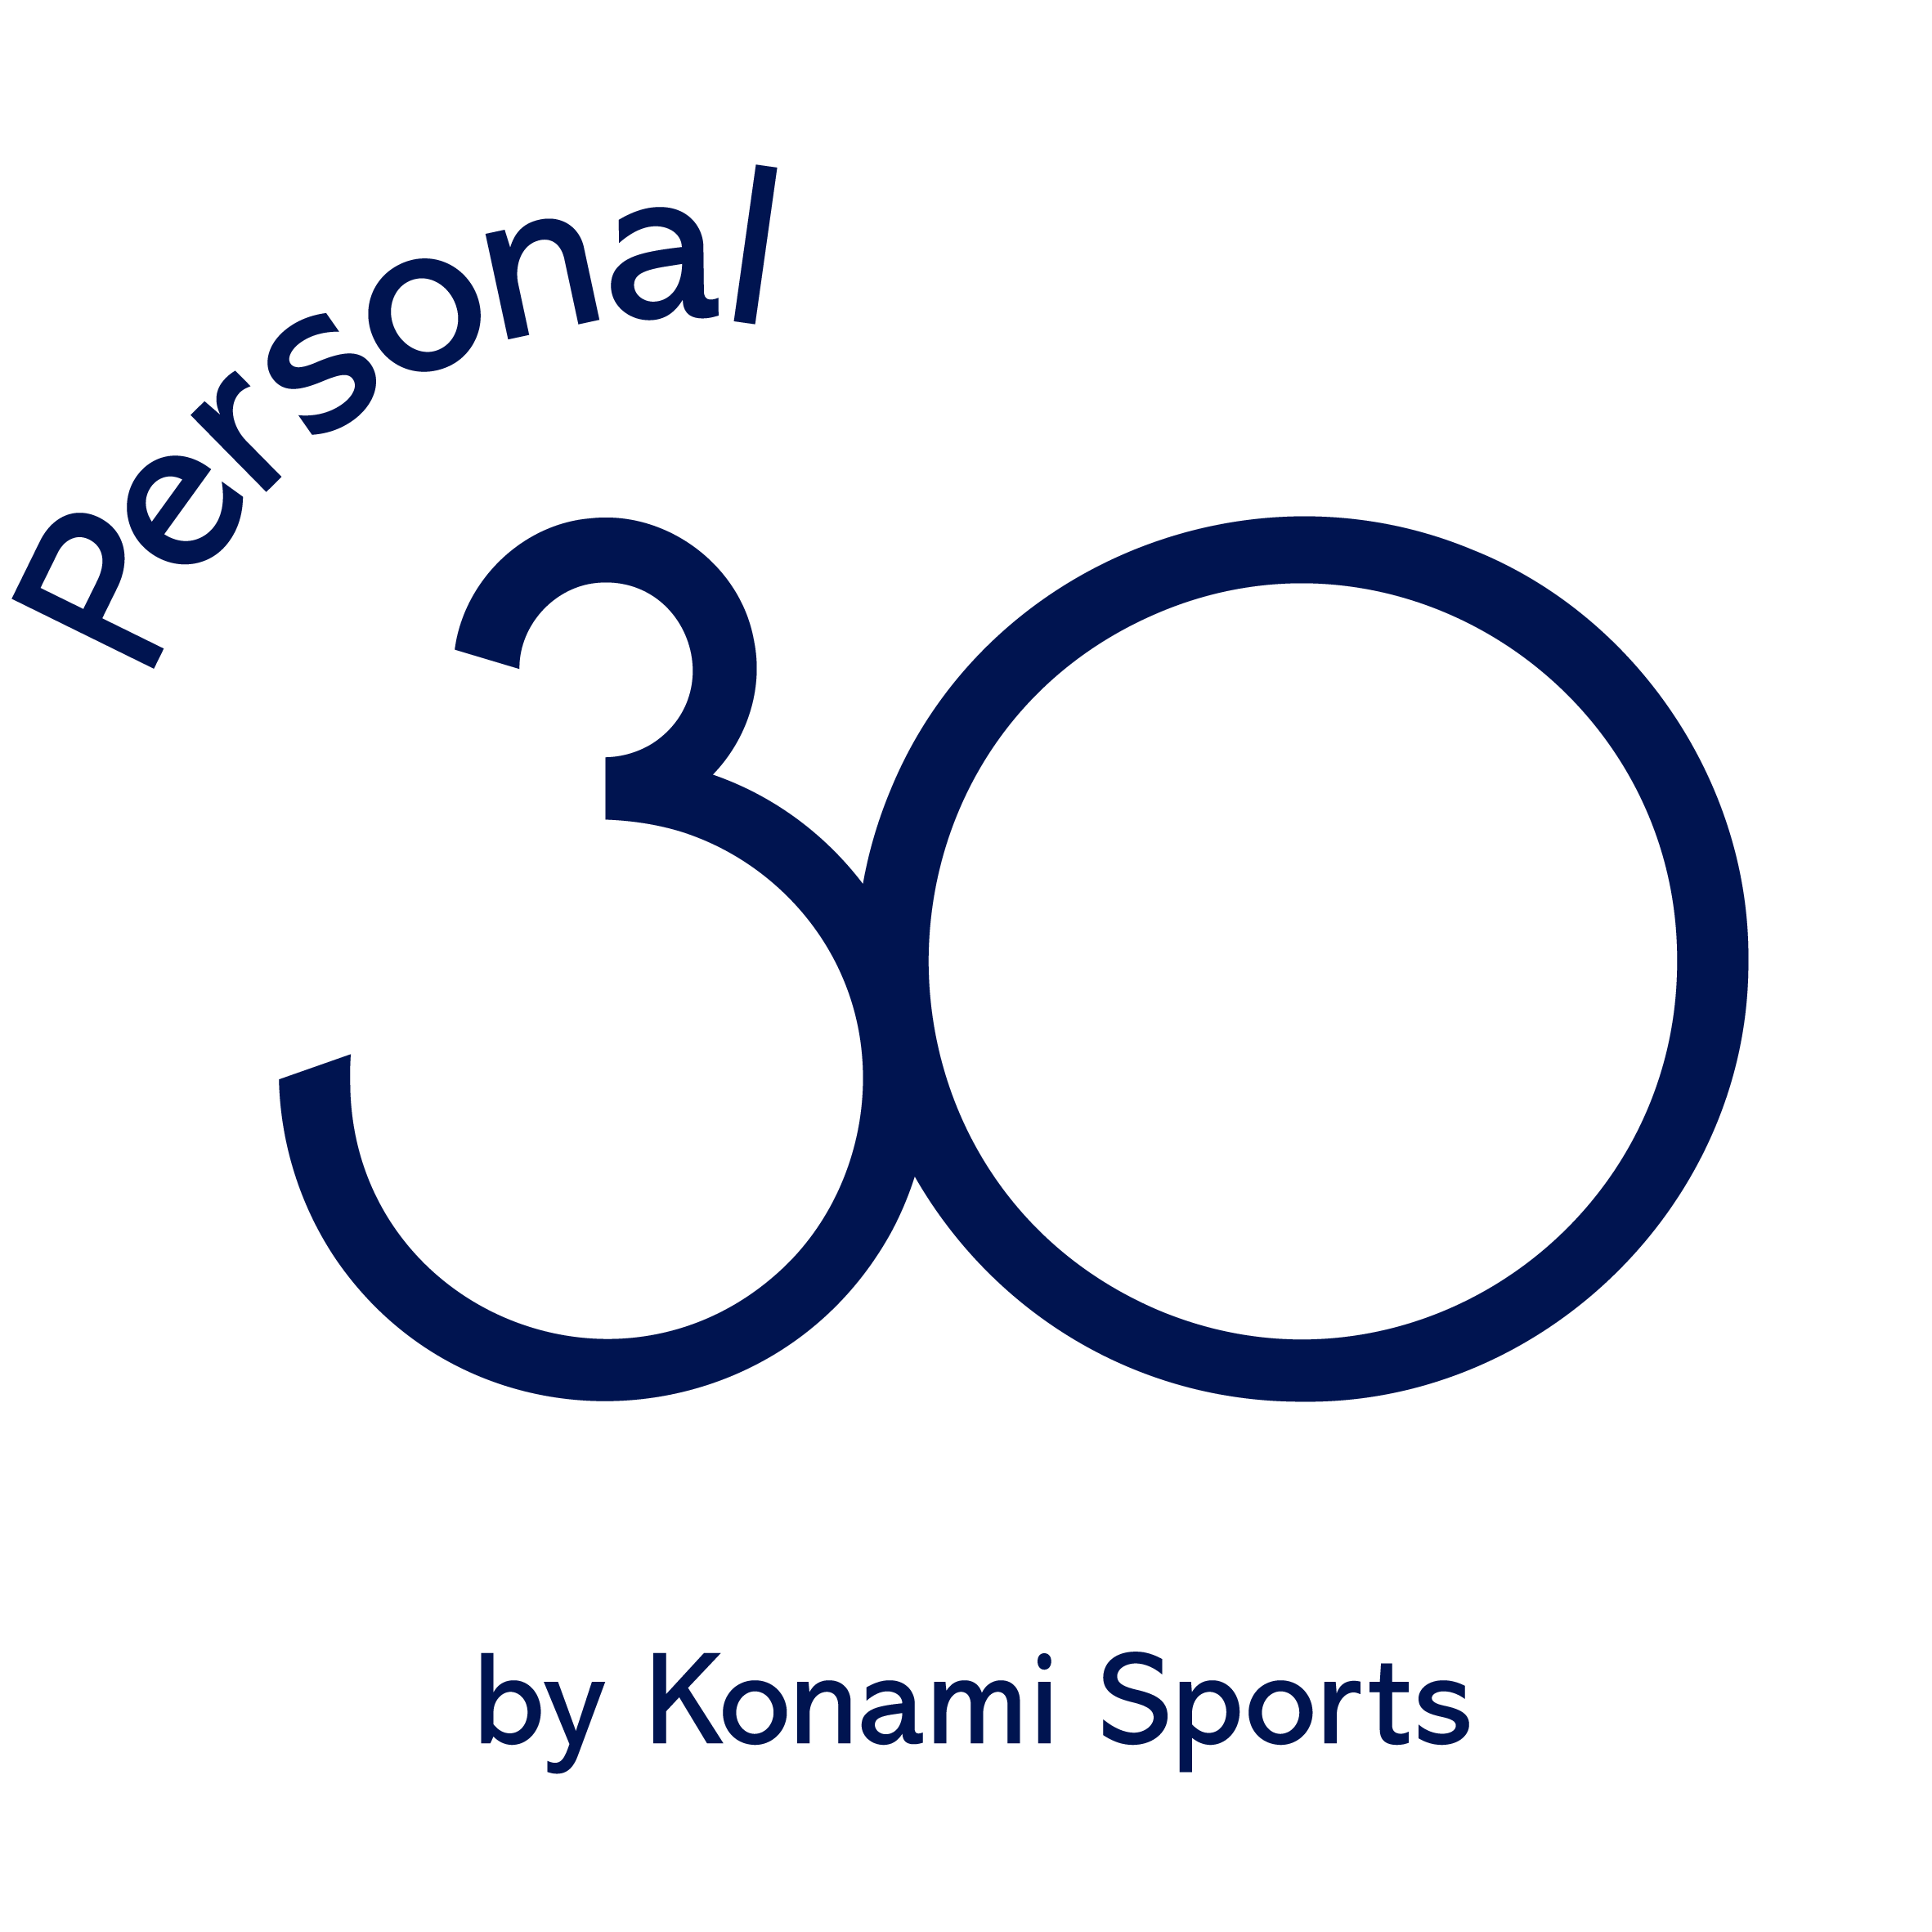 Personal 30